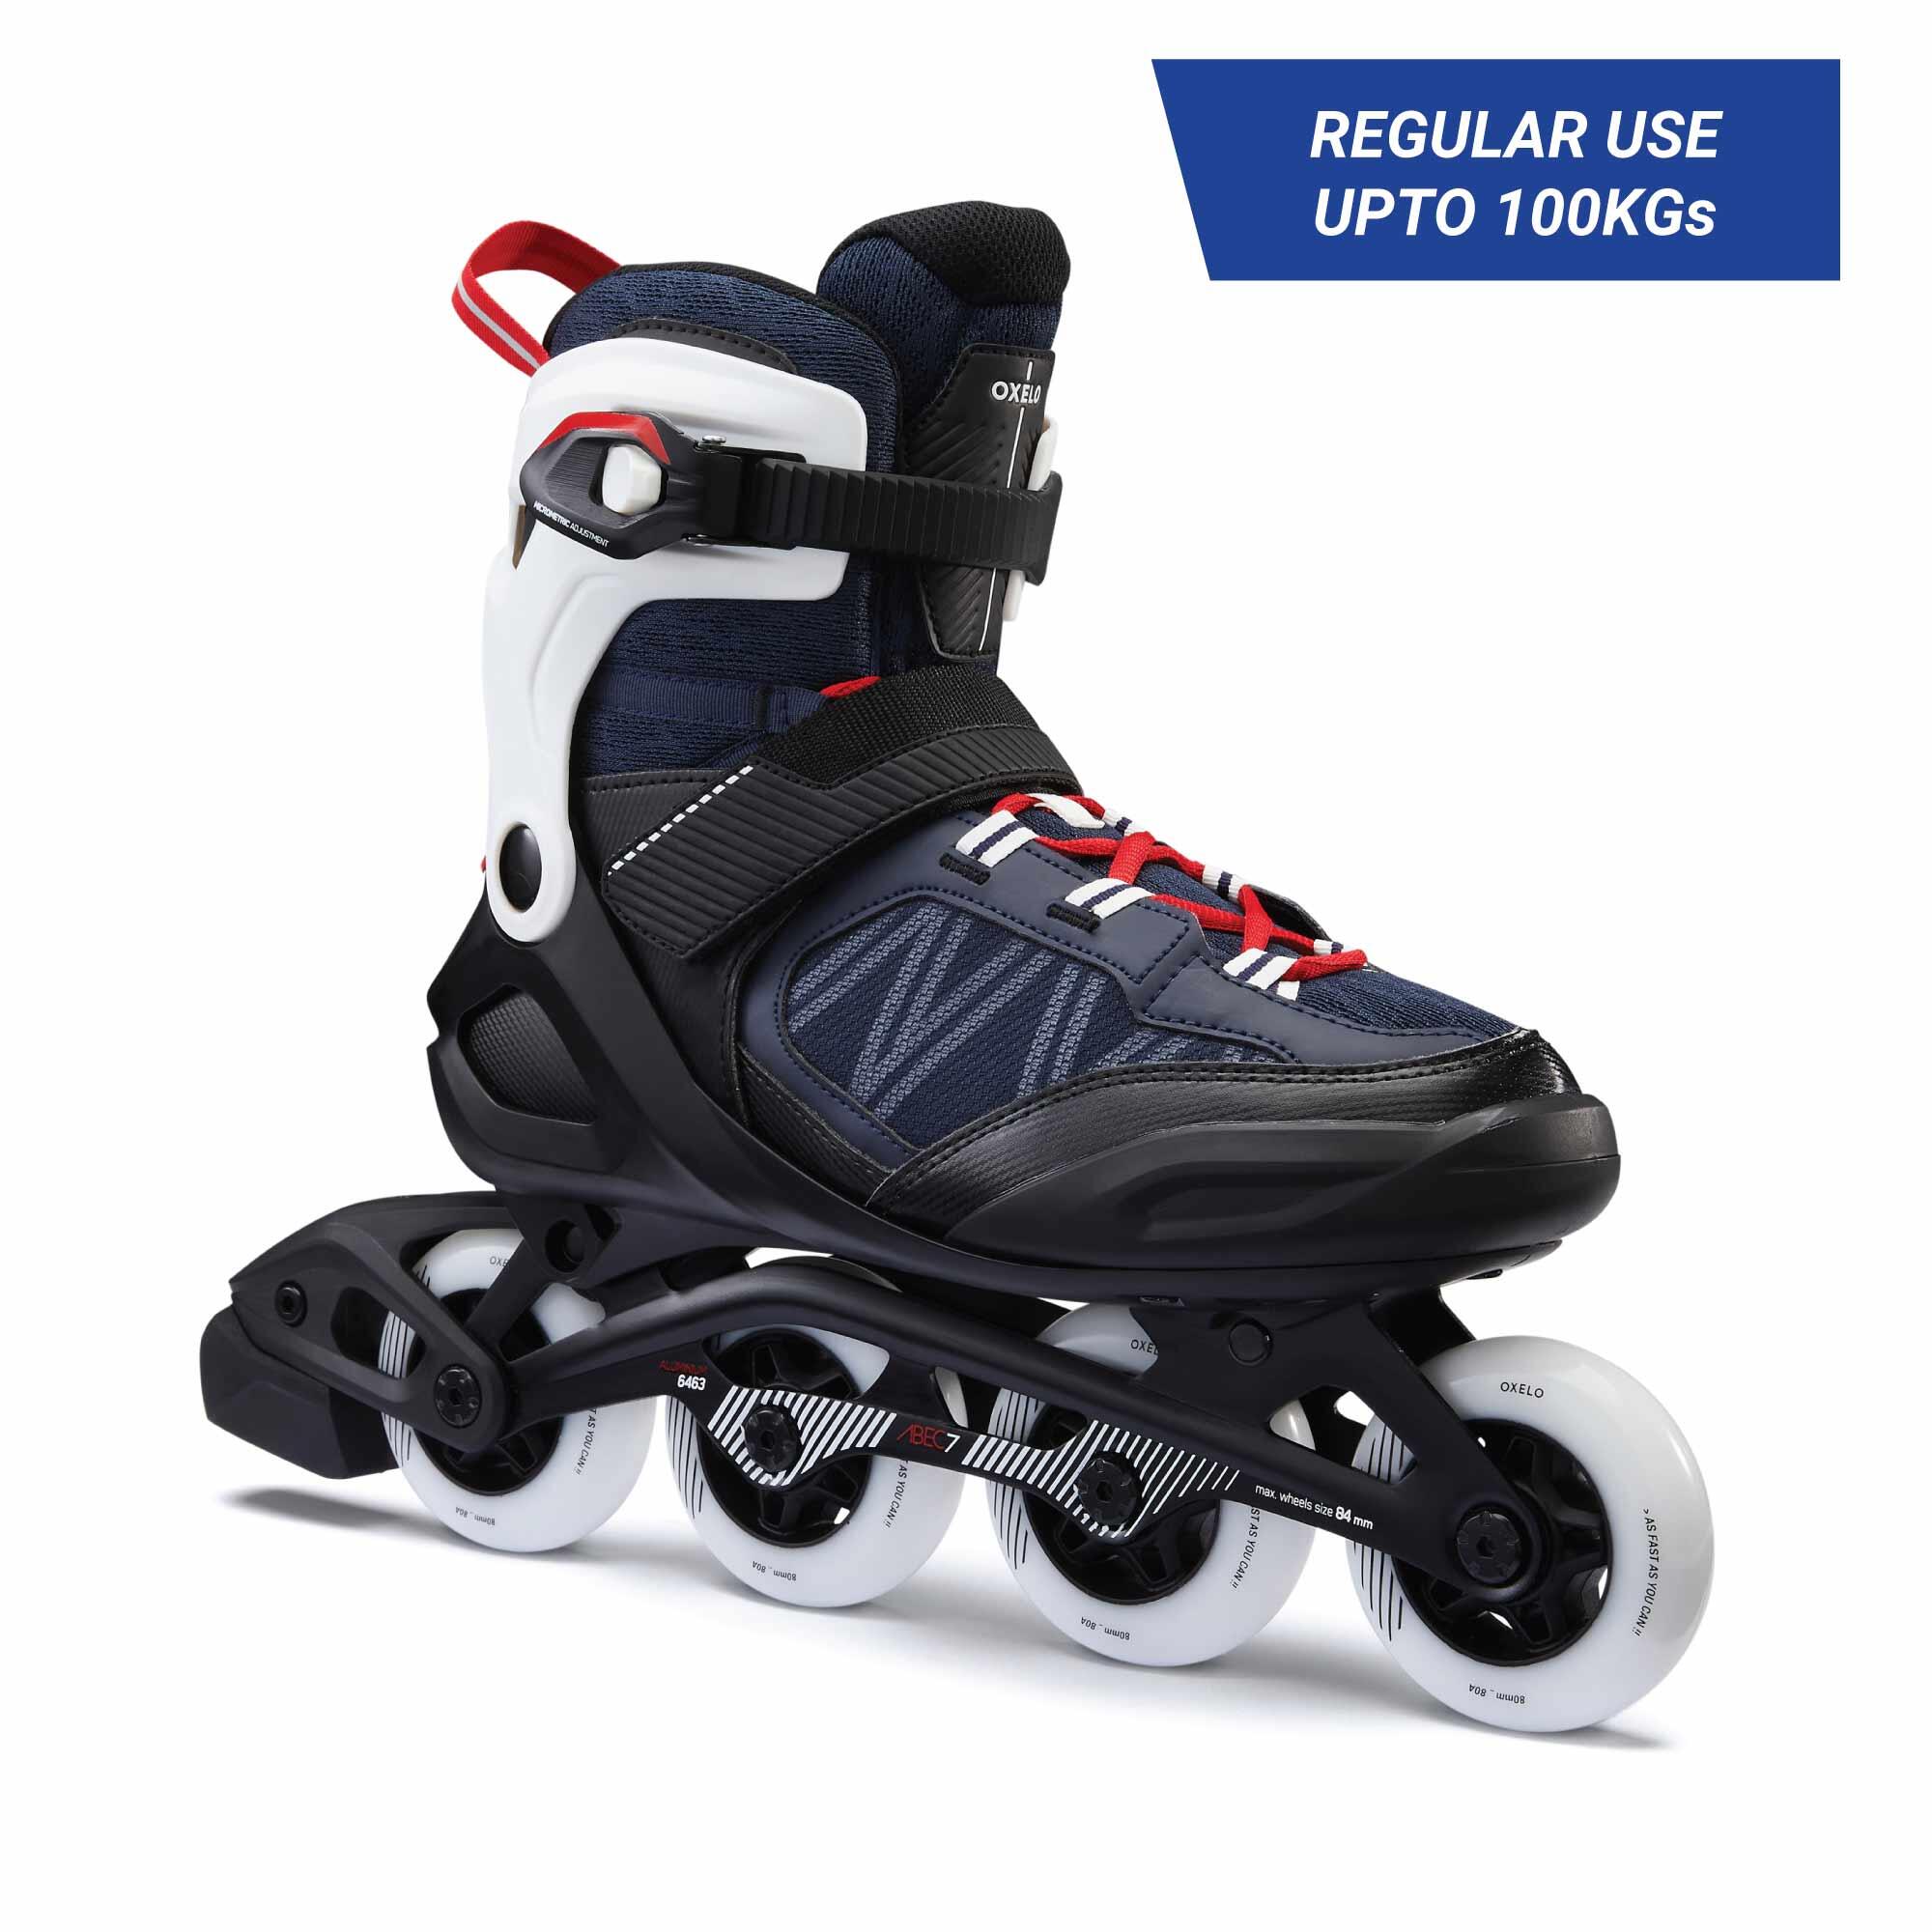 Outdoor Inline Blades Skates with Beginners & Advanced Comfortable Roller Blades OLLT Unisex Youth Size Inline Skates High Performance Breathable Inline Roller Skates 